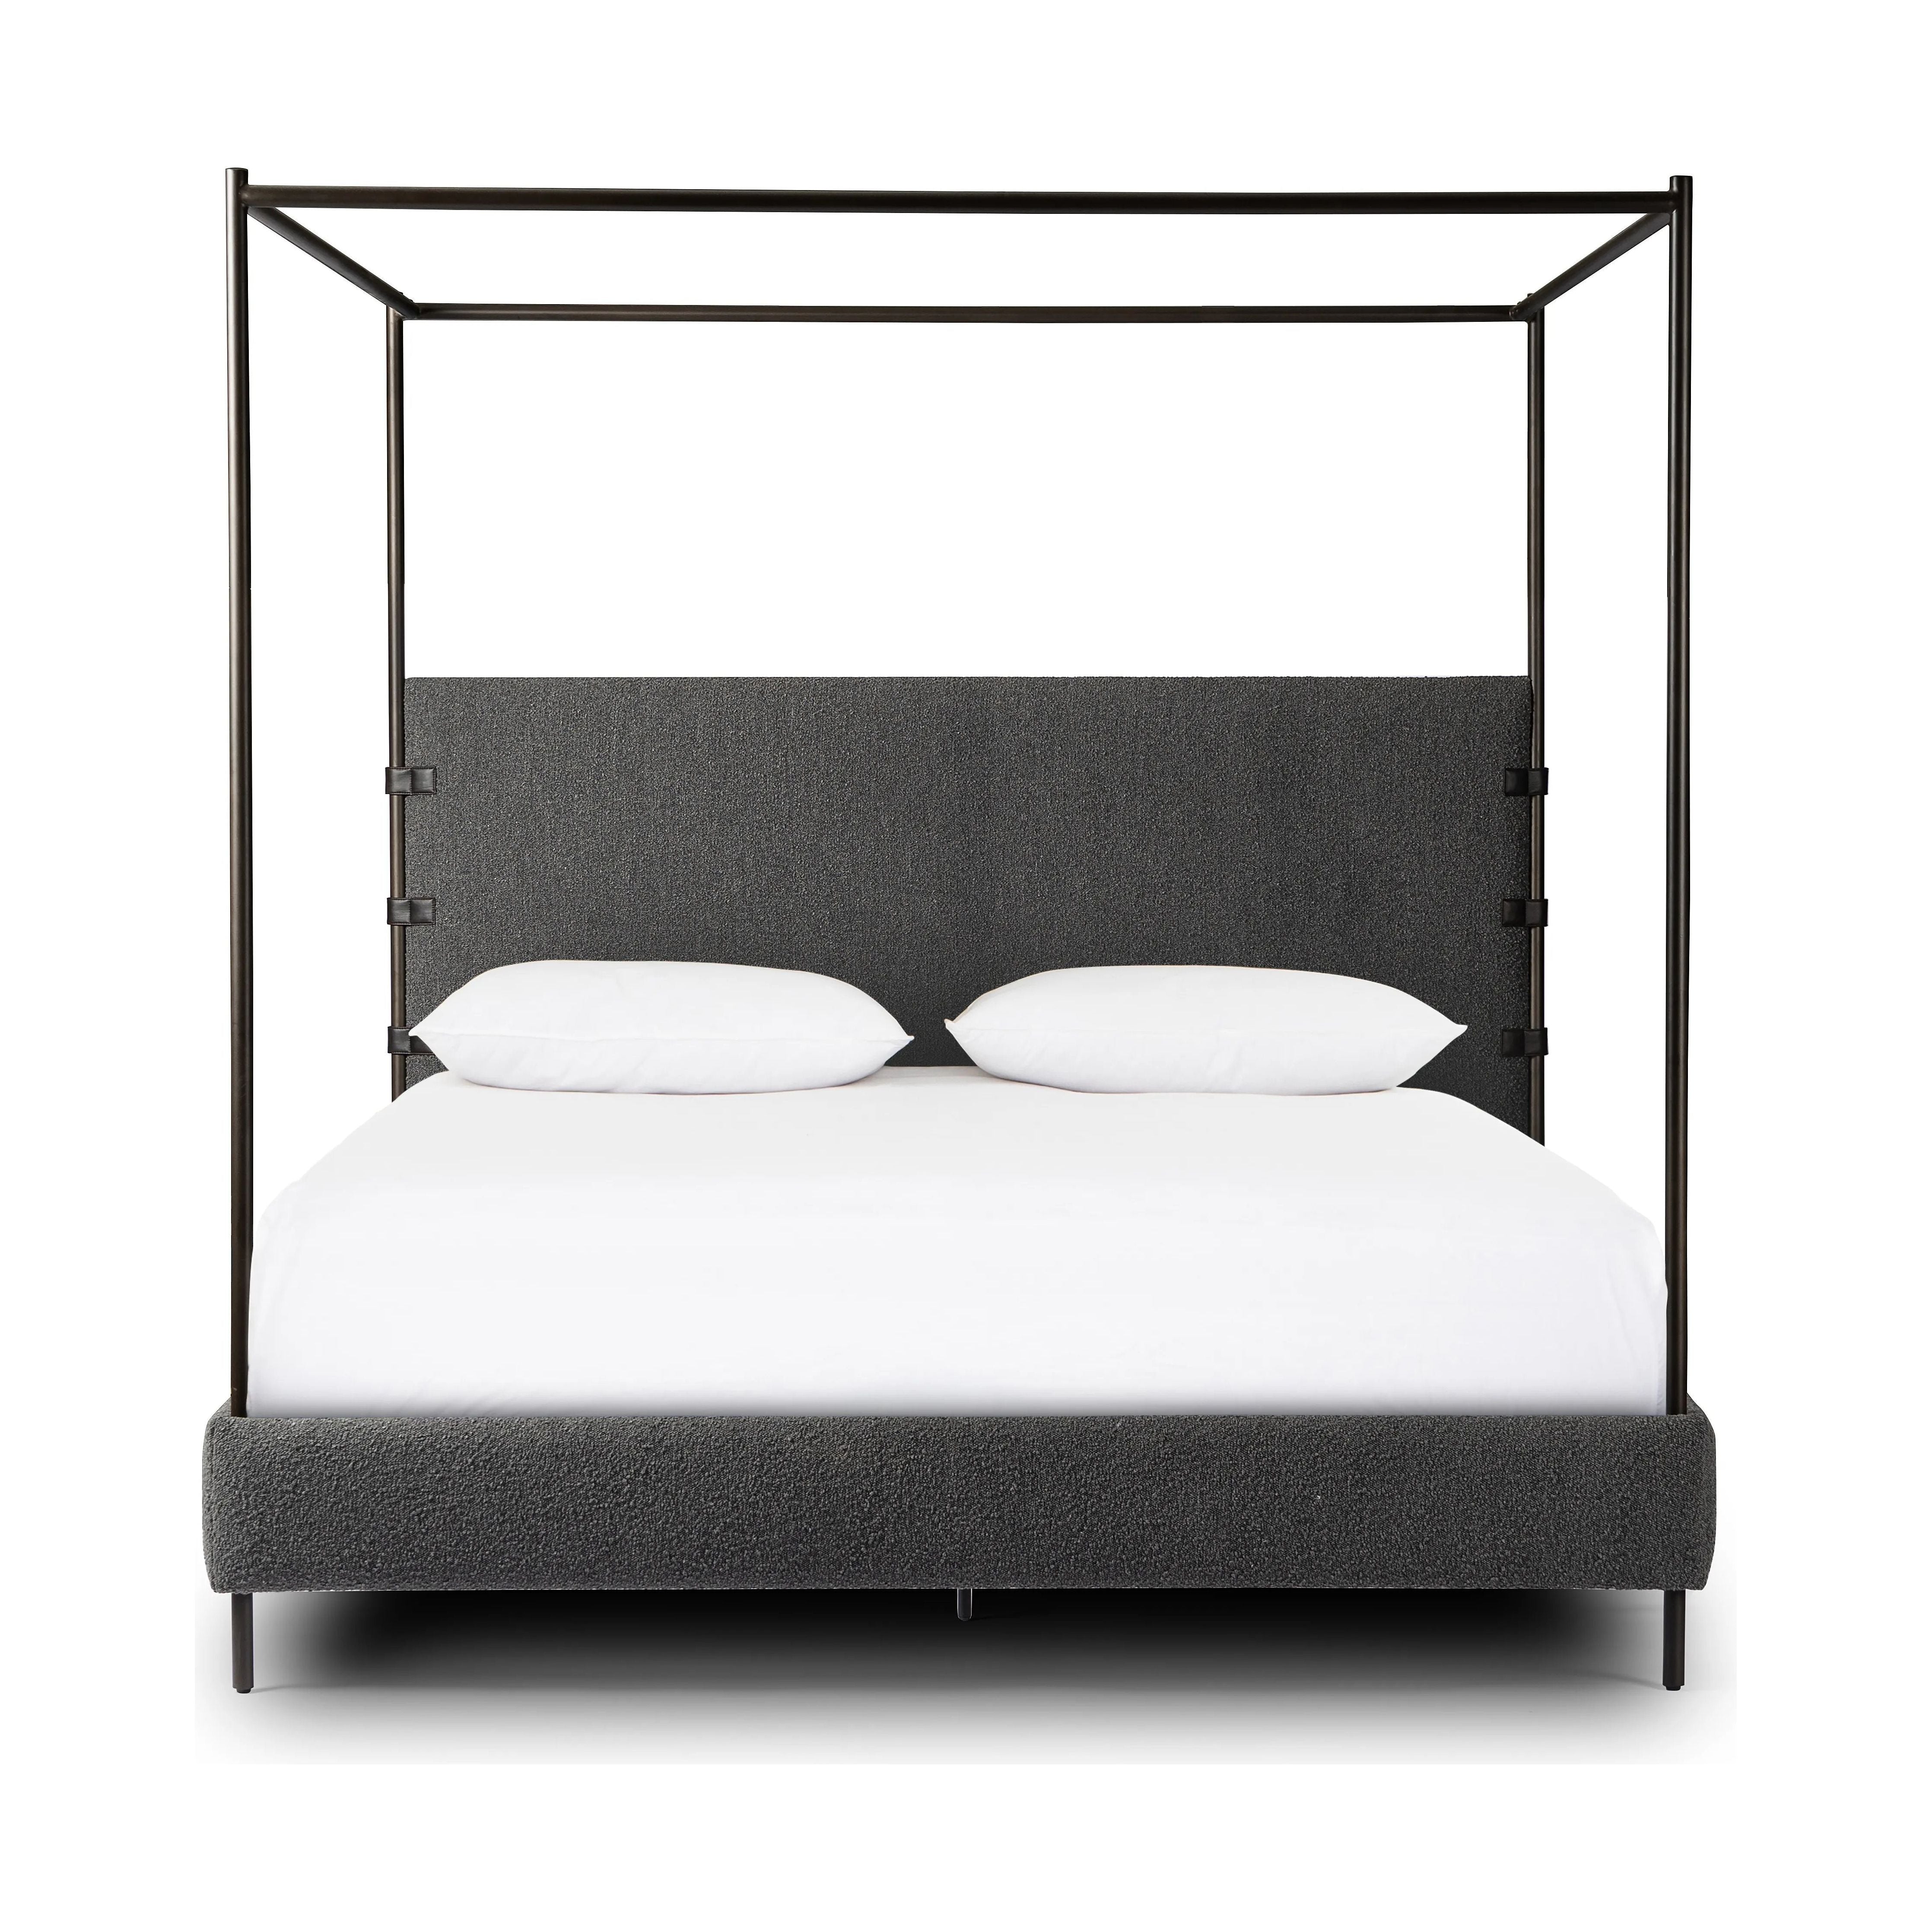 Bring texture into play. This iron canopy bed features a headboard upholstered in a classic boucle fabric with decorative leather straps for a material-driven contrast. Standard box spring required. This bed is not compatible with an adjustable mattress.Collection: Irondal Amethyst Home provides interior design, new home construction design consulting, vintage area rugs, and lighting in the Dallas metro area.